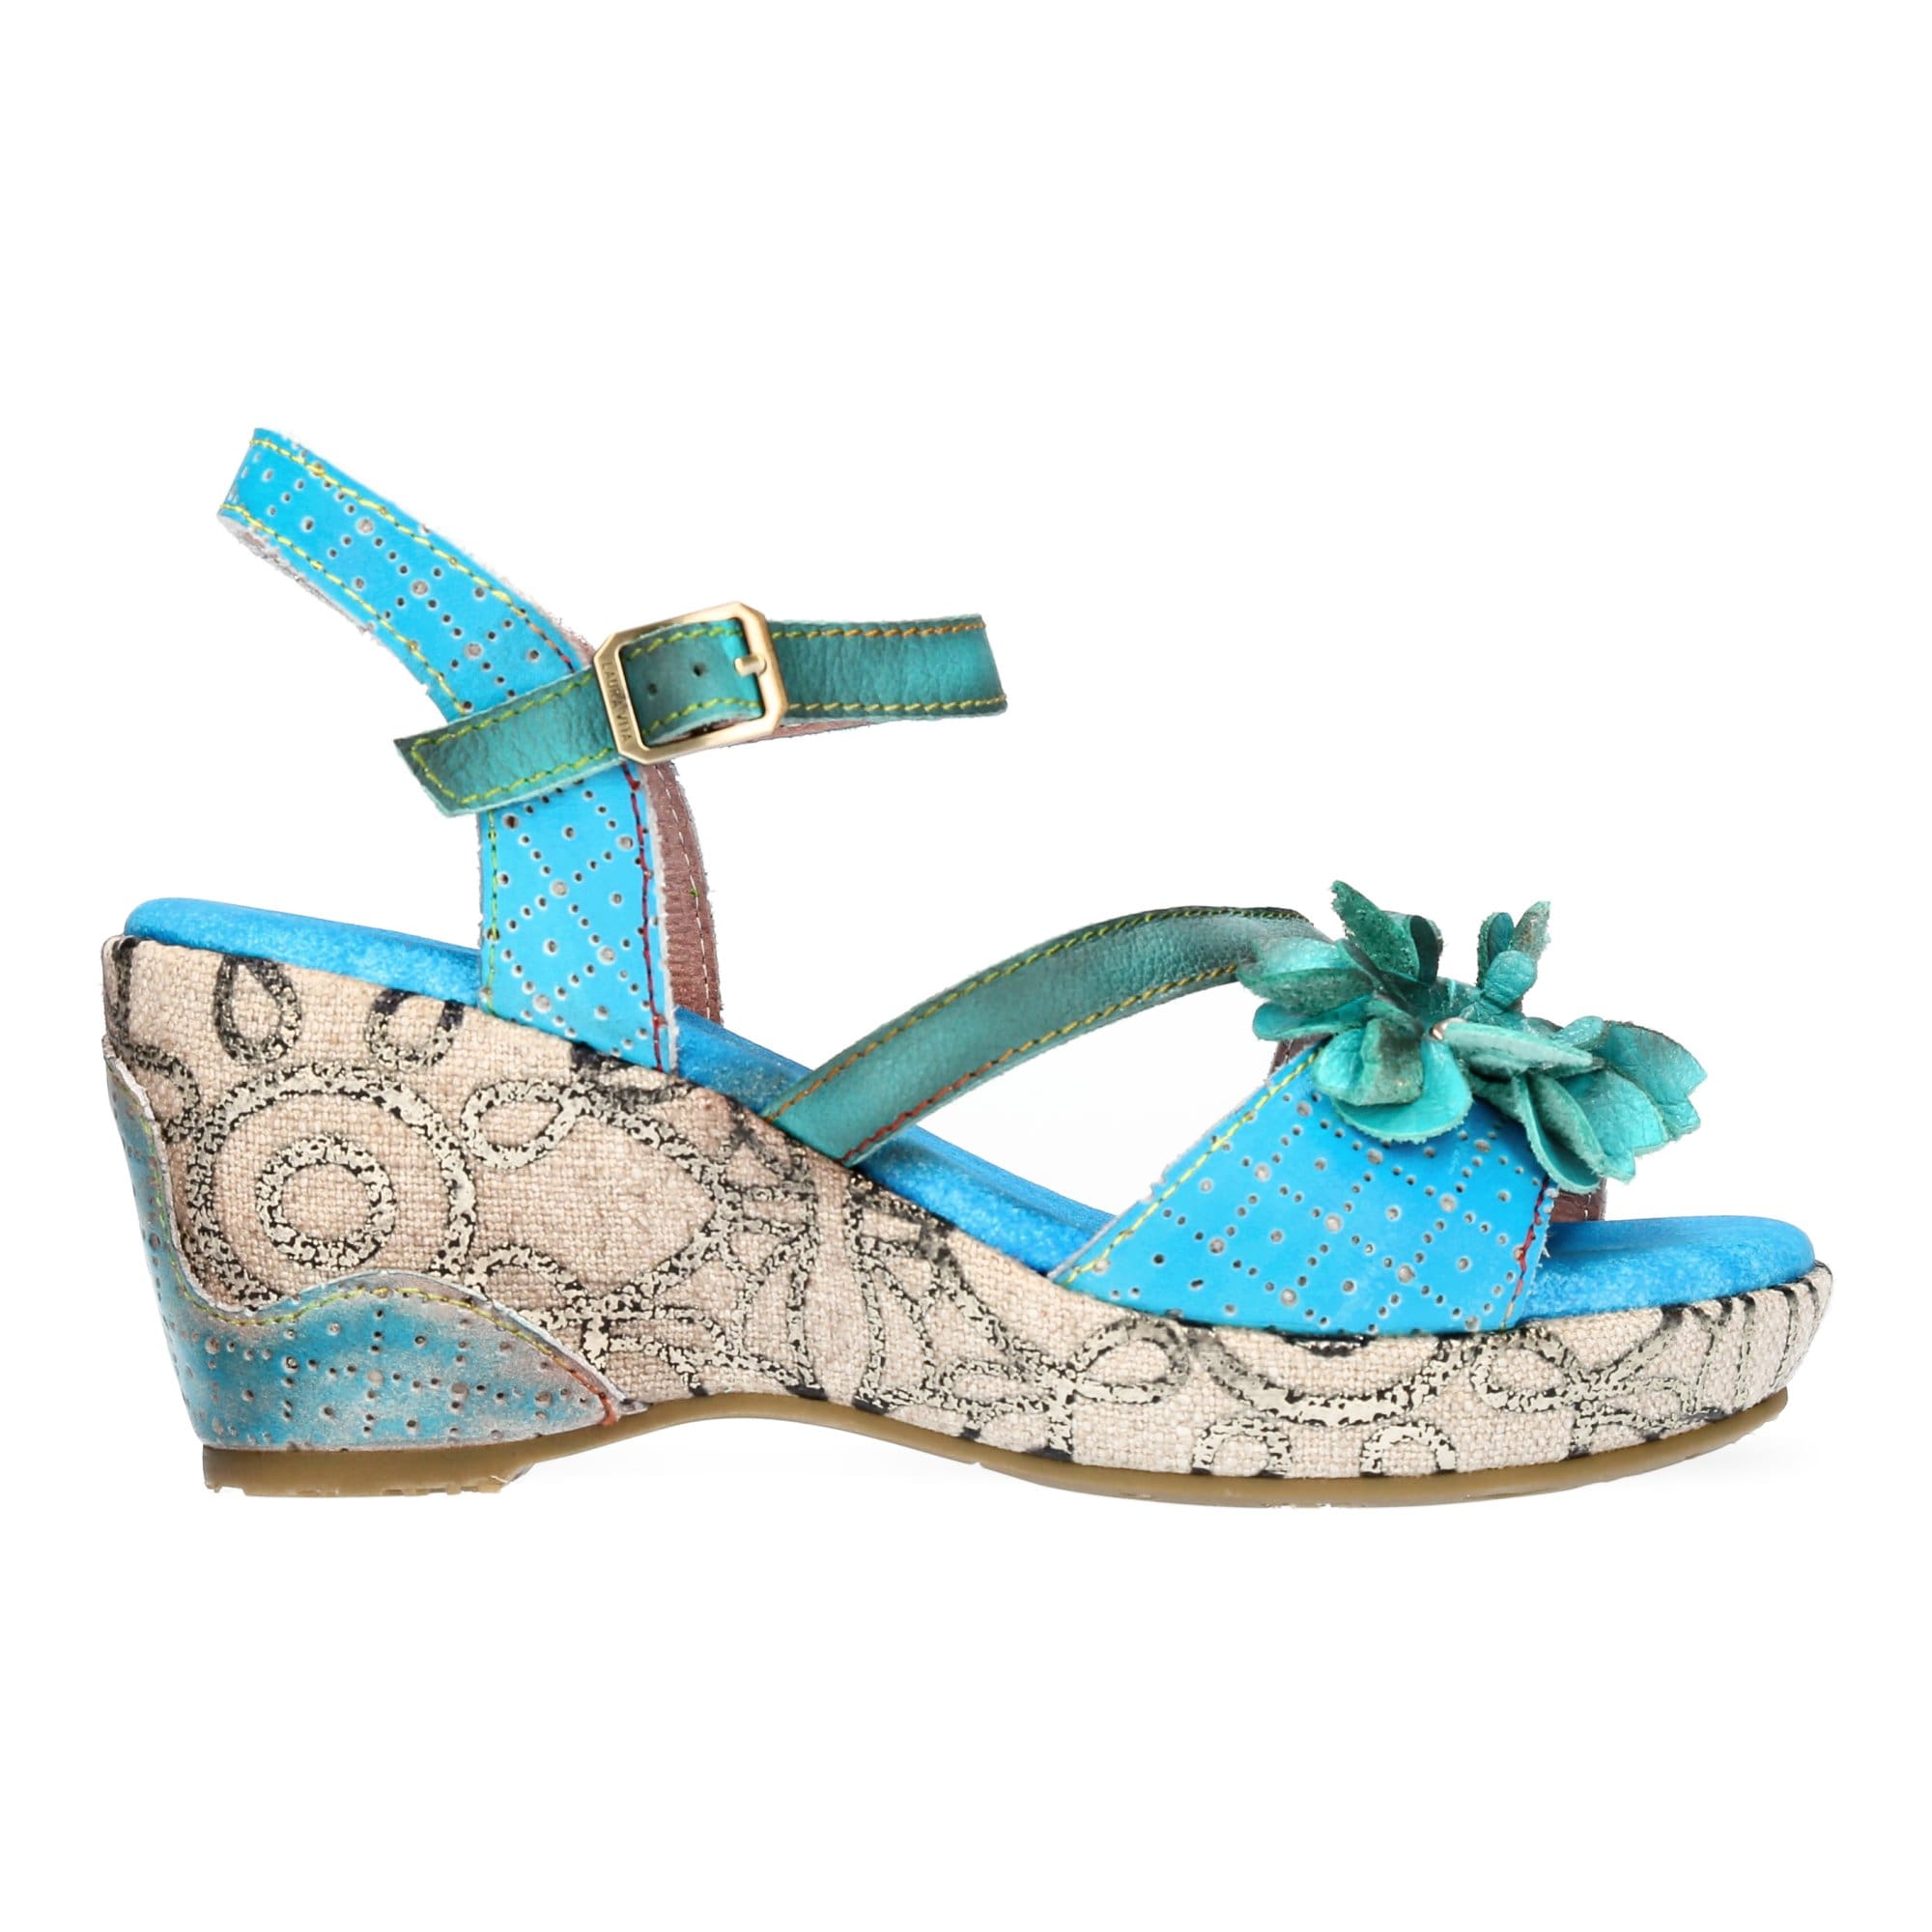 BECAUTEO 11 shoes - 35 / Turquoise - Sandal